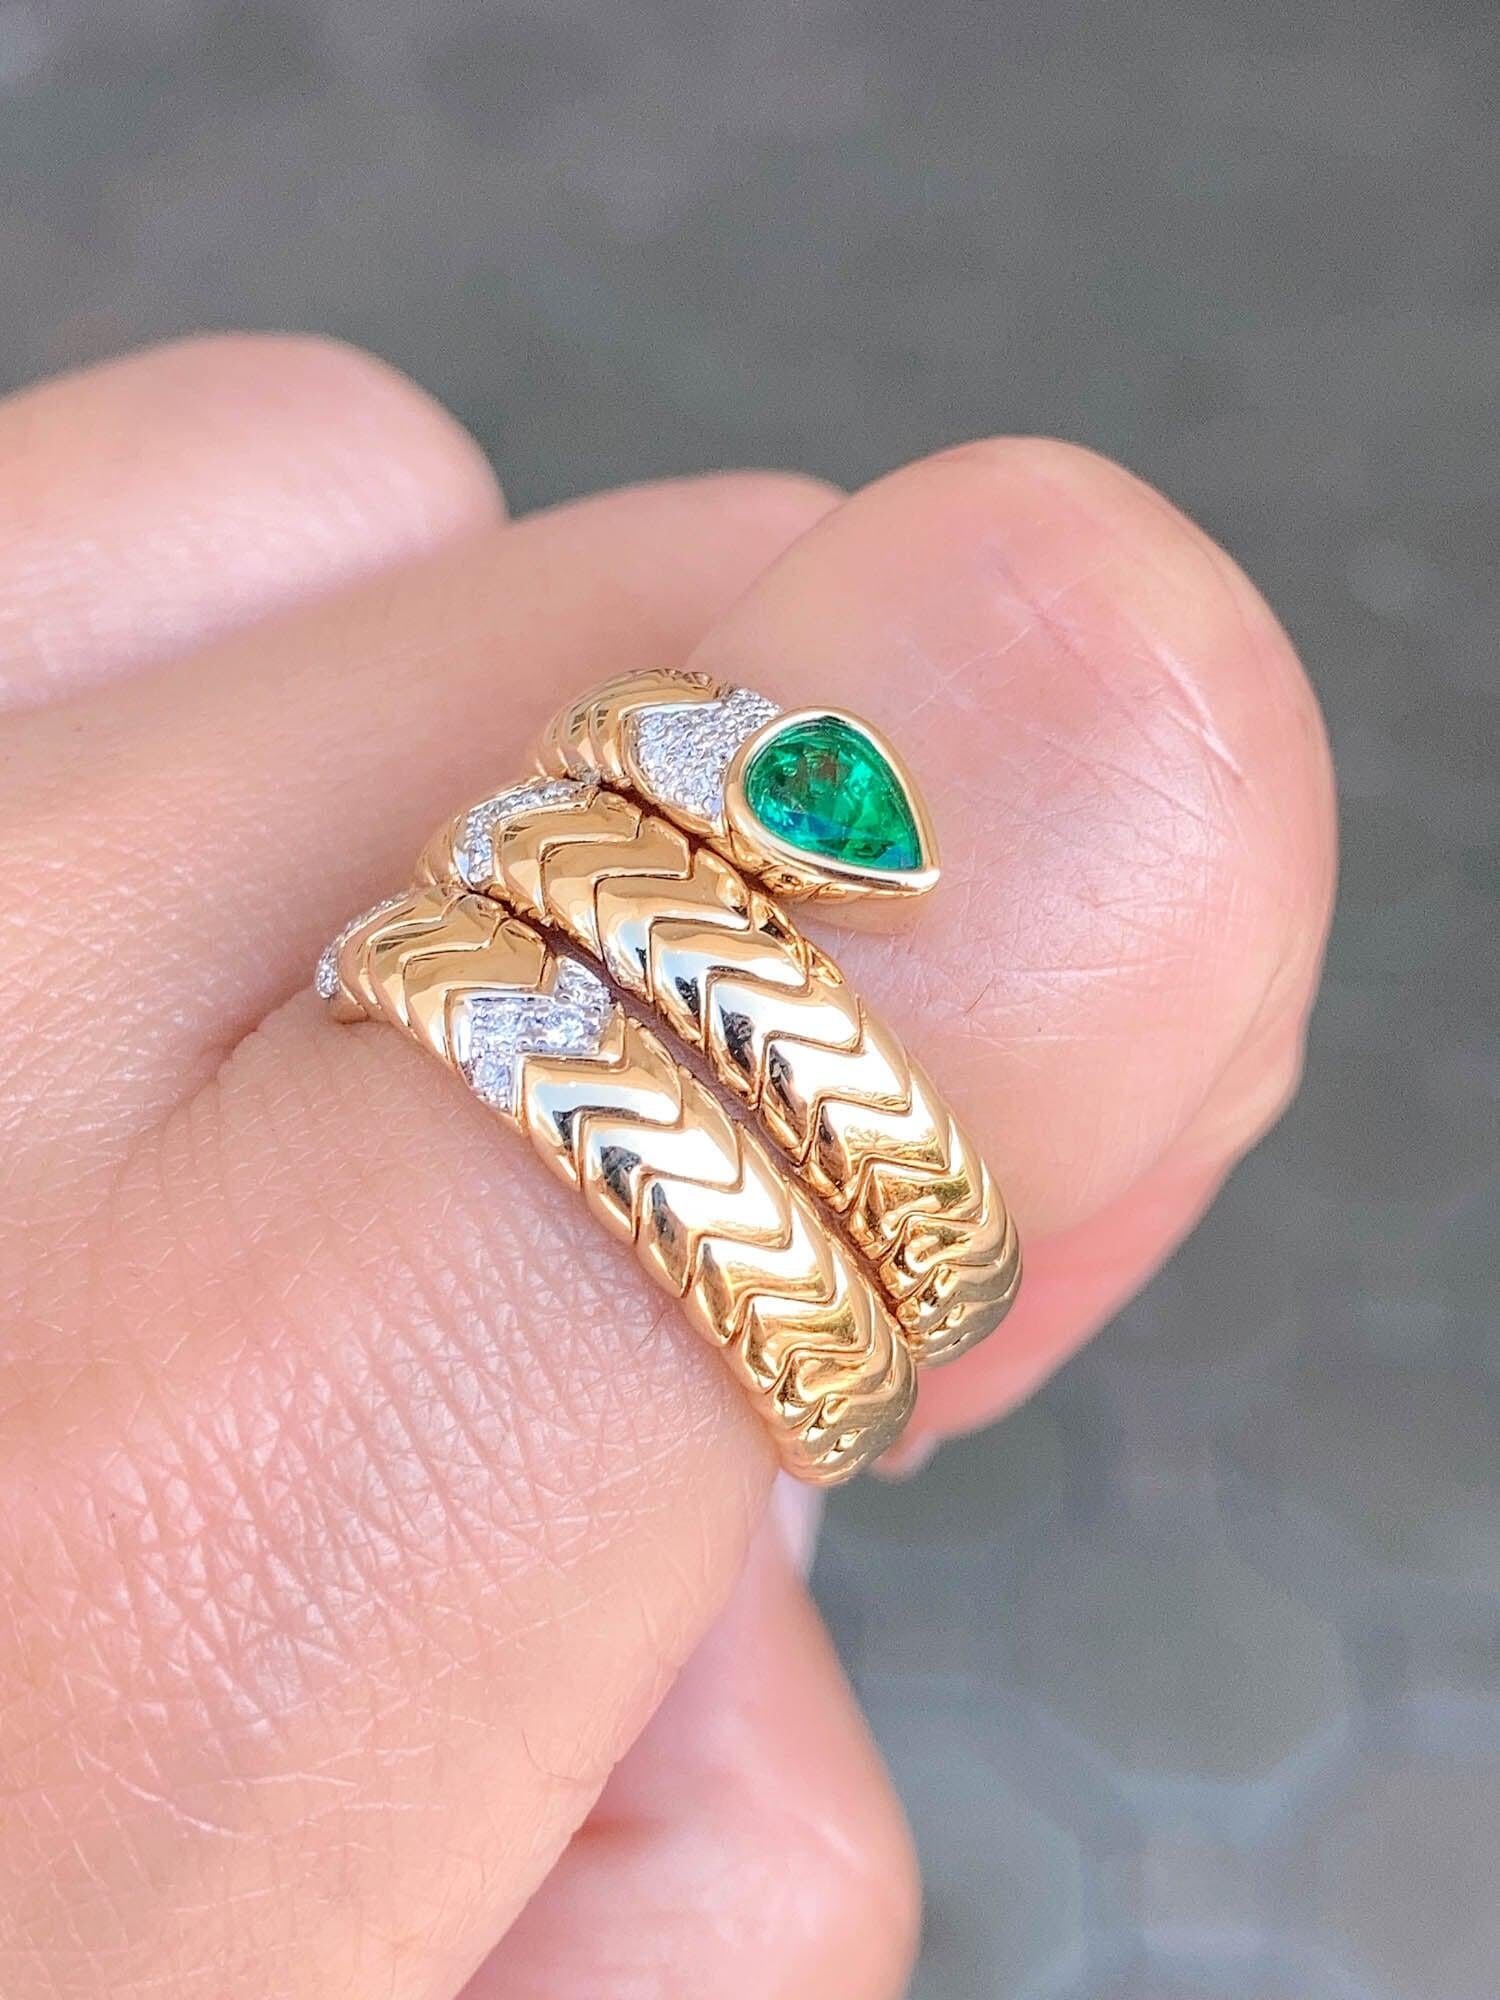 18k Gold Tubogas Snake Coil Ring with Emerald Head and Diamond Accent 13.8g 5